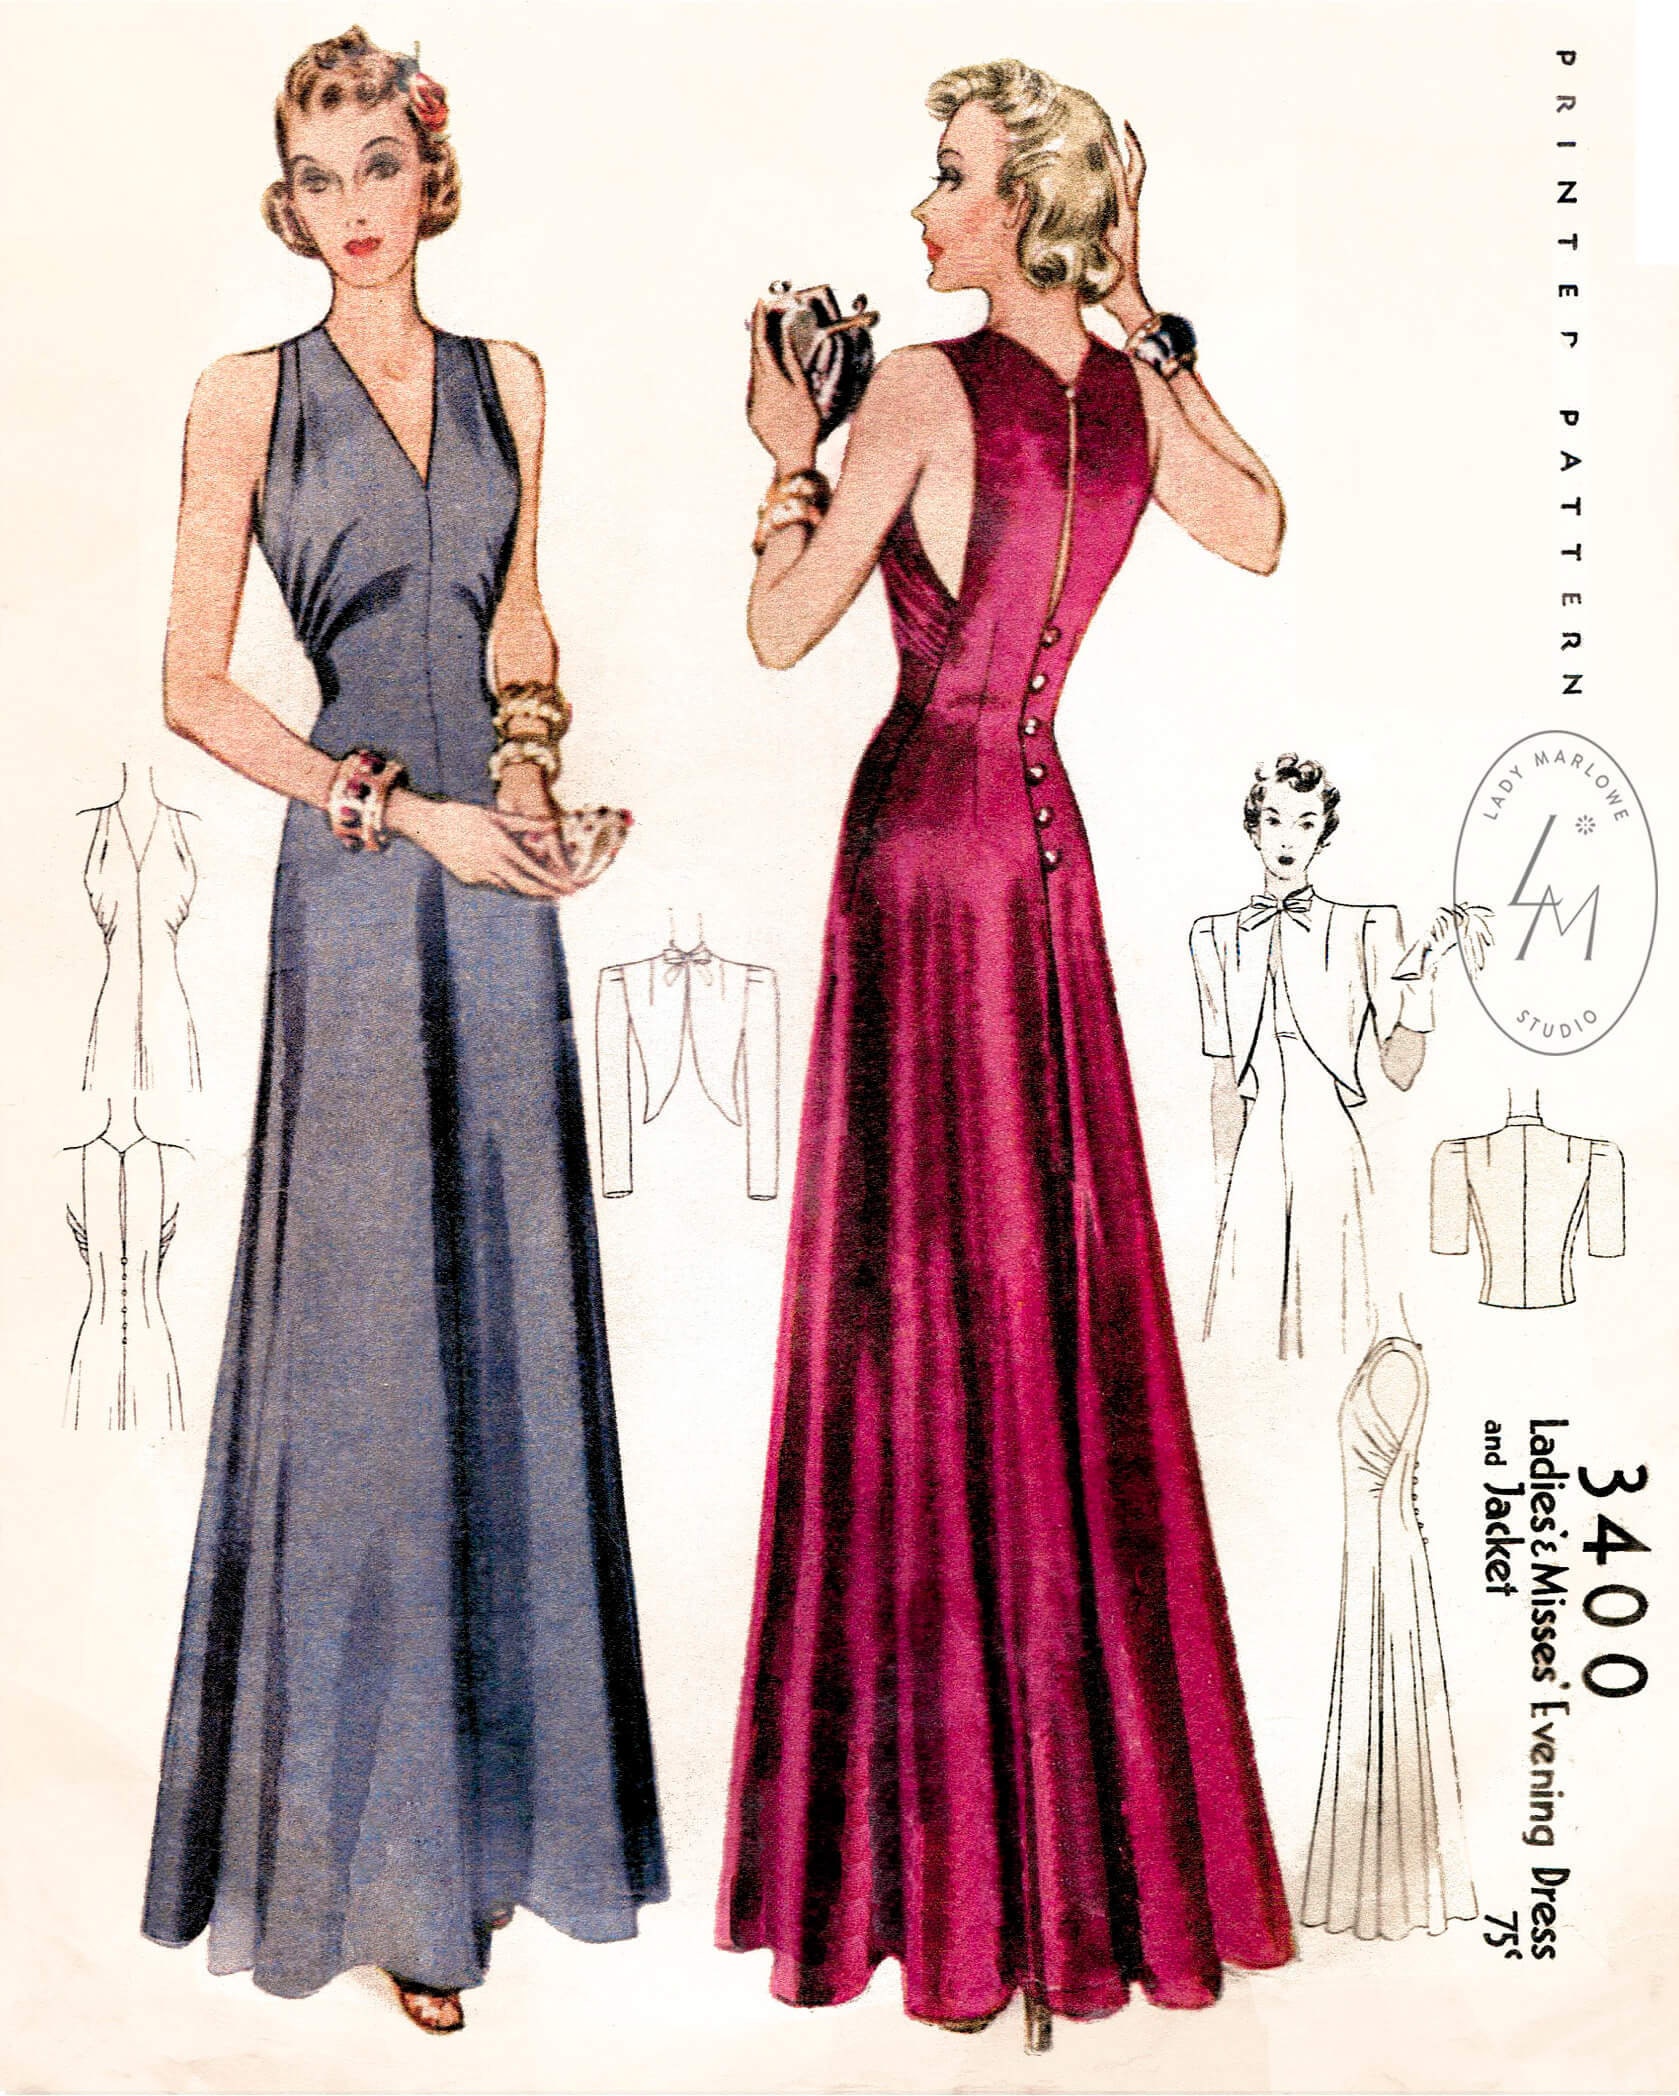 1920s 1930s dress vintage sewing pattern reproduction – Lady Marlowe